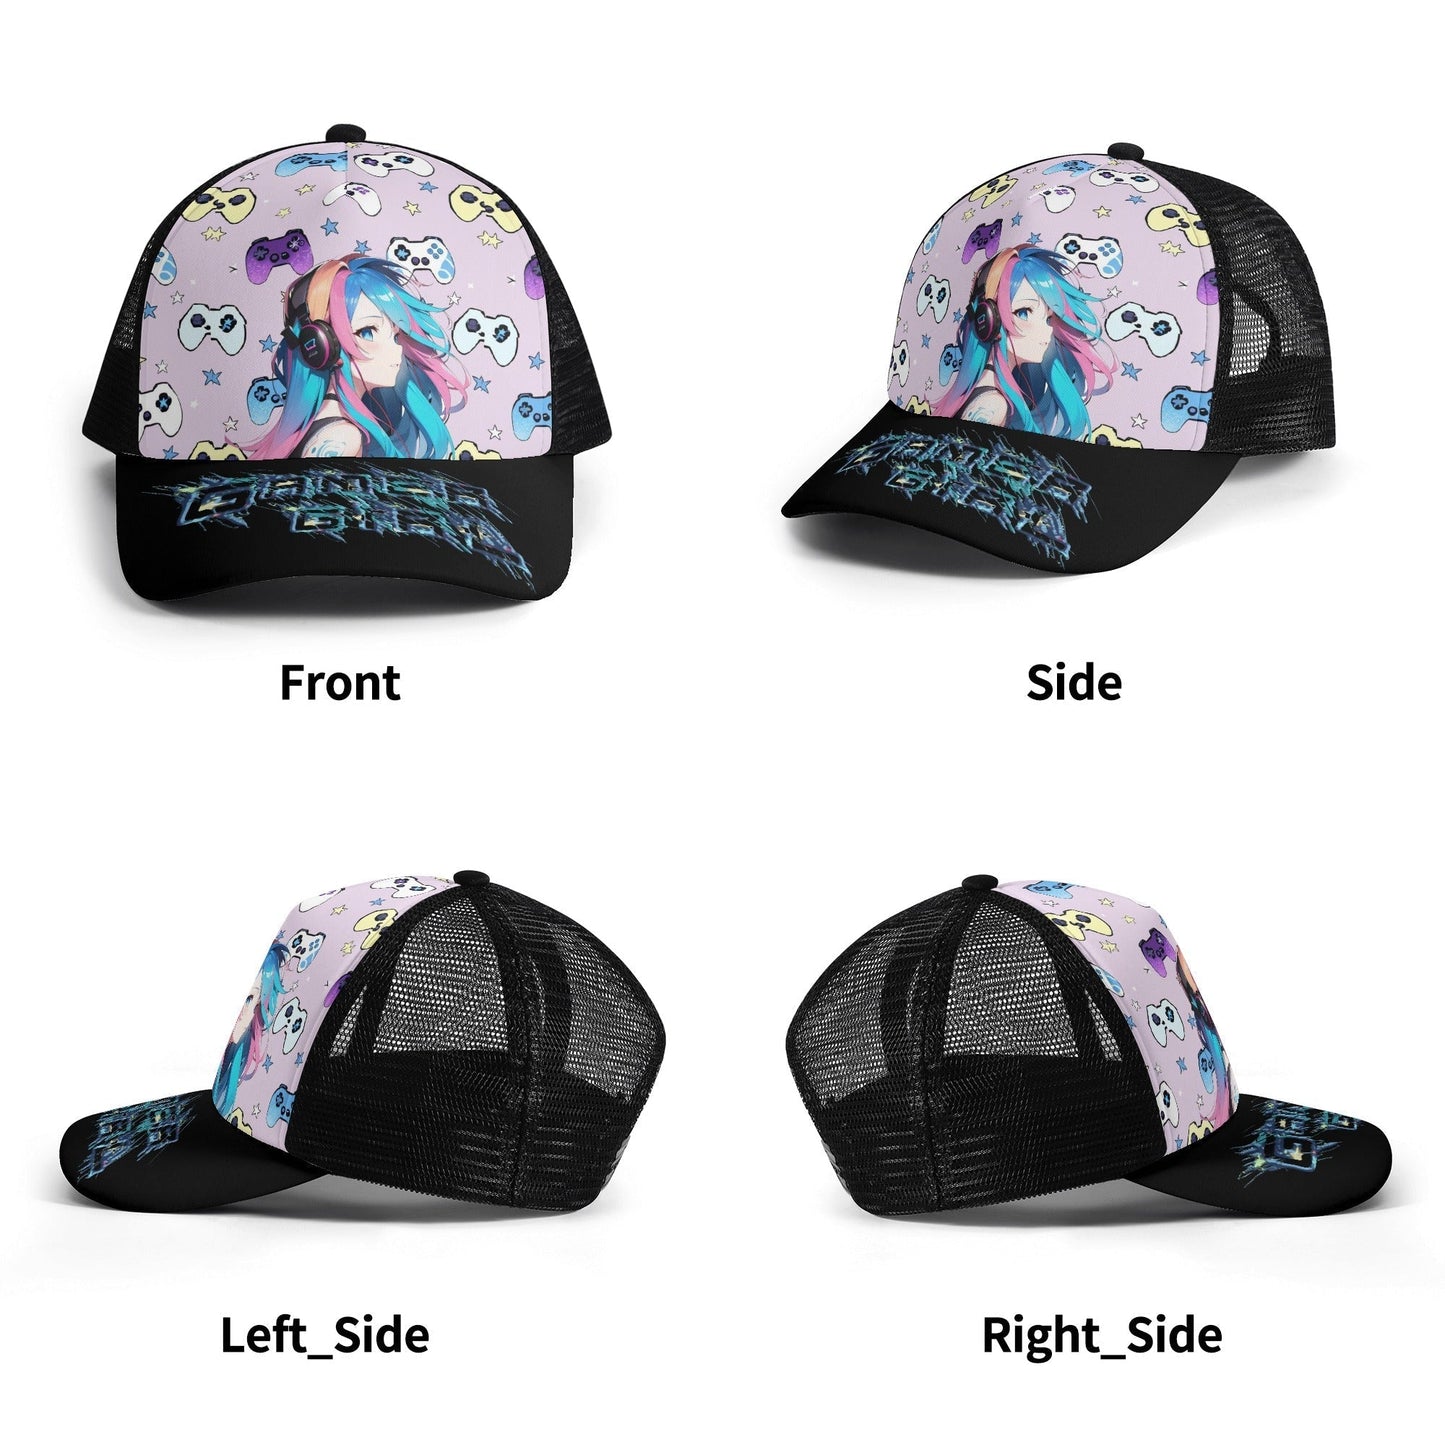 Stand out  with the  Gamer Girl Kids Mesh Baseball Caps  available at Hey Nugget. Grab yours today!